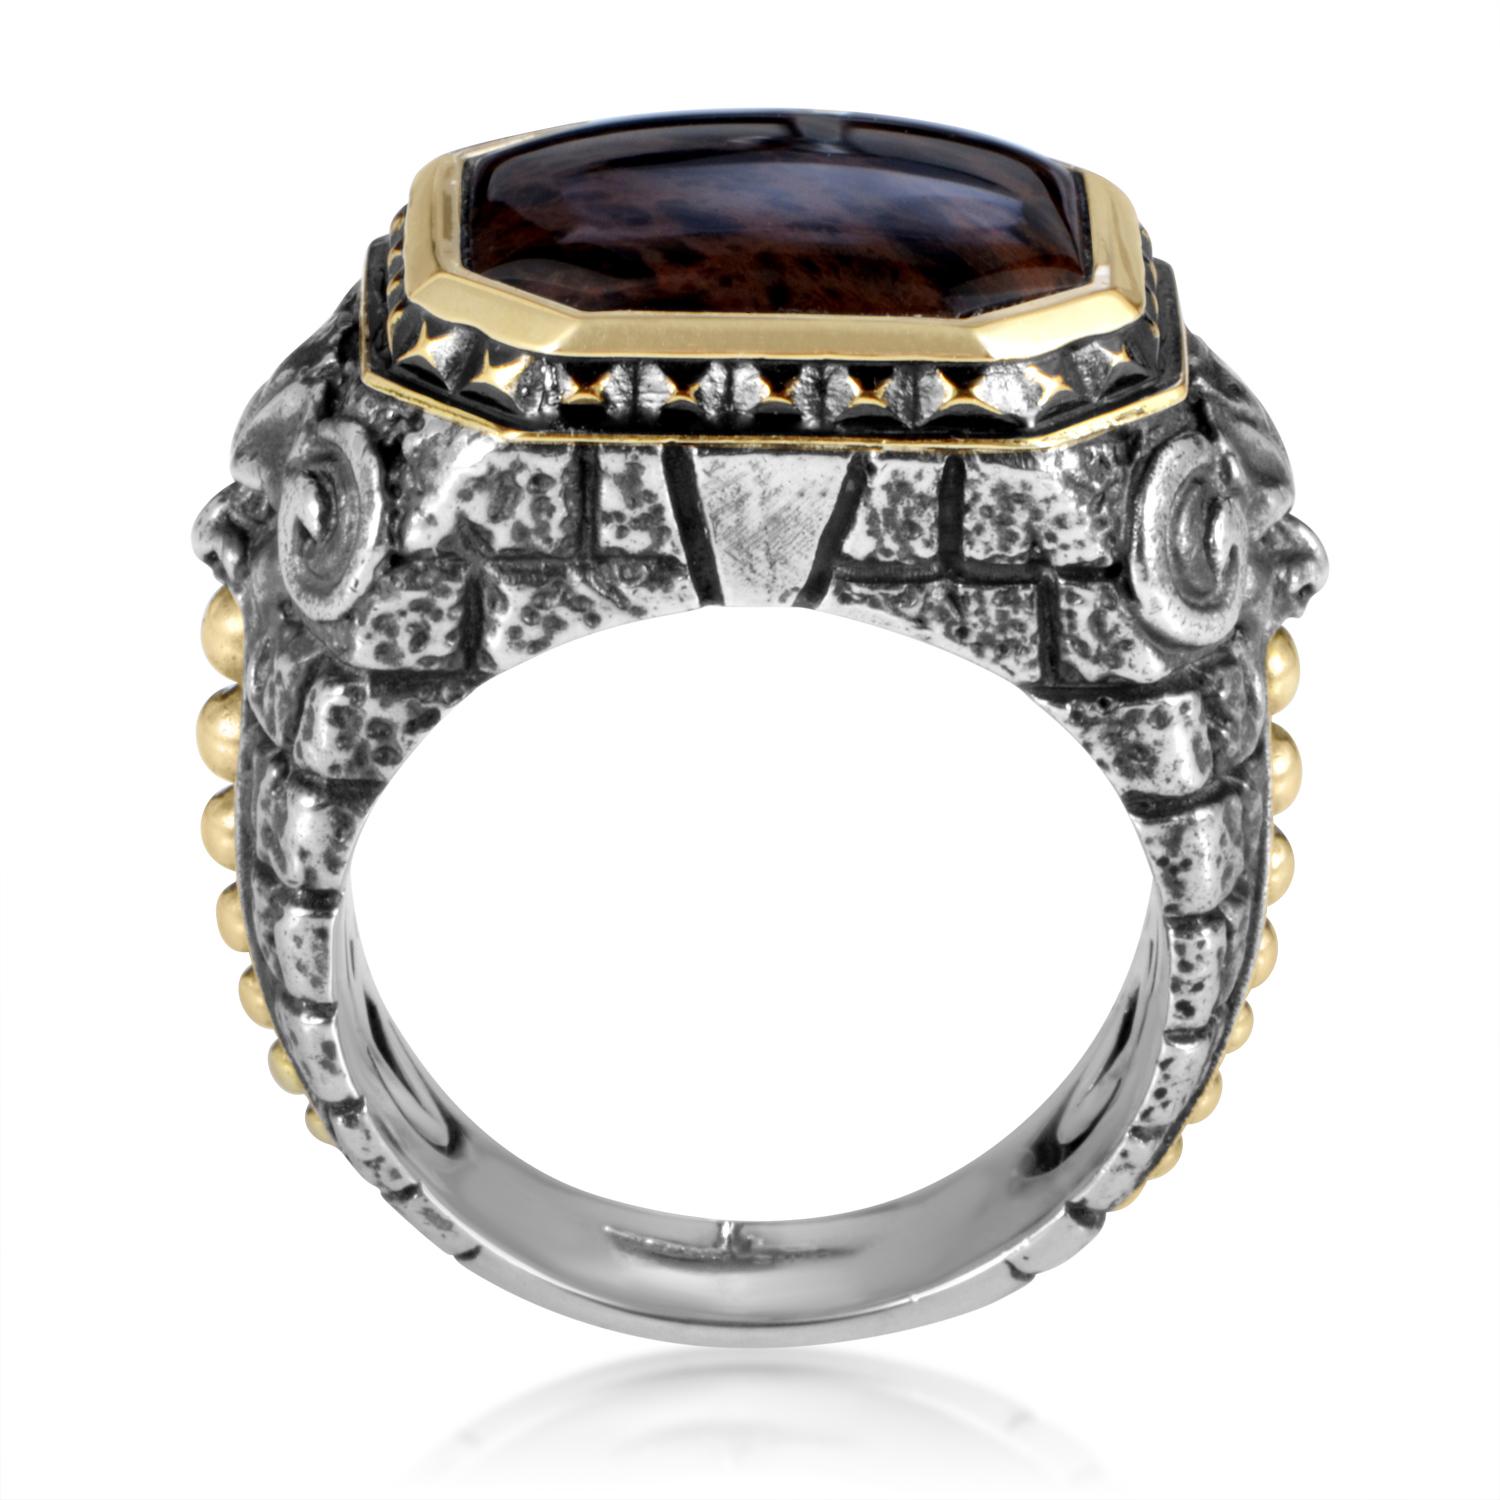 Inspiration taken from majestic architecture has resulted in a daring ring by Stephen Webster. Brickwork and gargoyle engraving provide a stern yet fascinating basis for this sterling silver ring that is topped with 18K yellow gold bezel setting